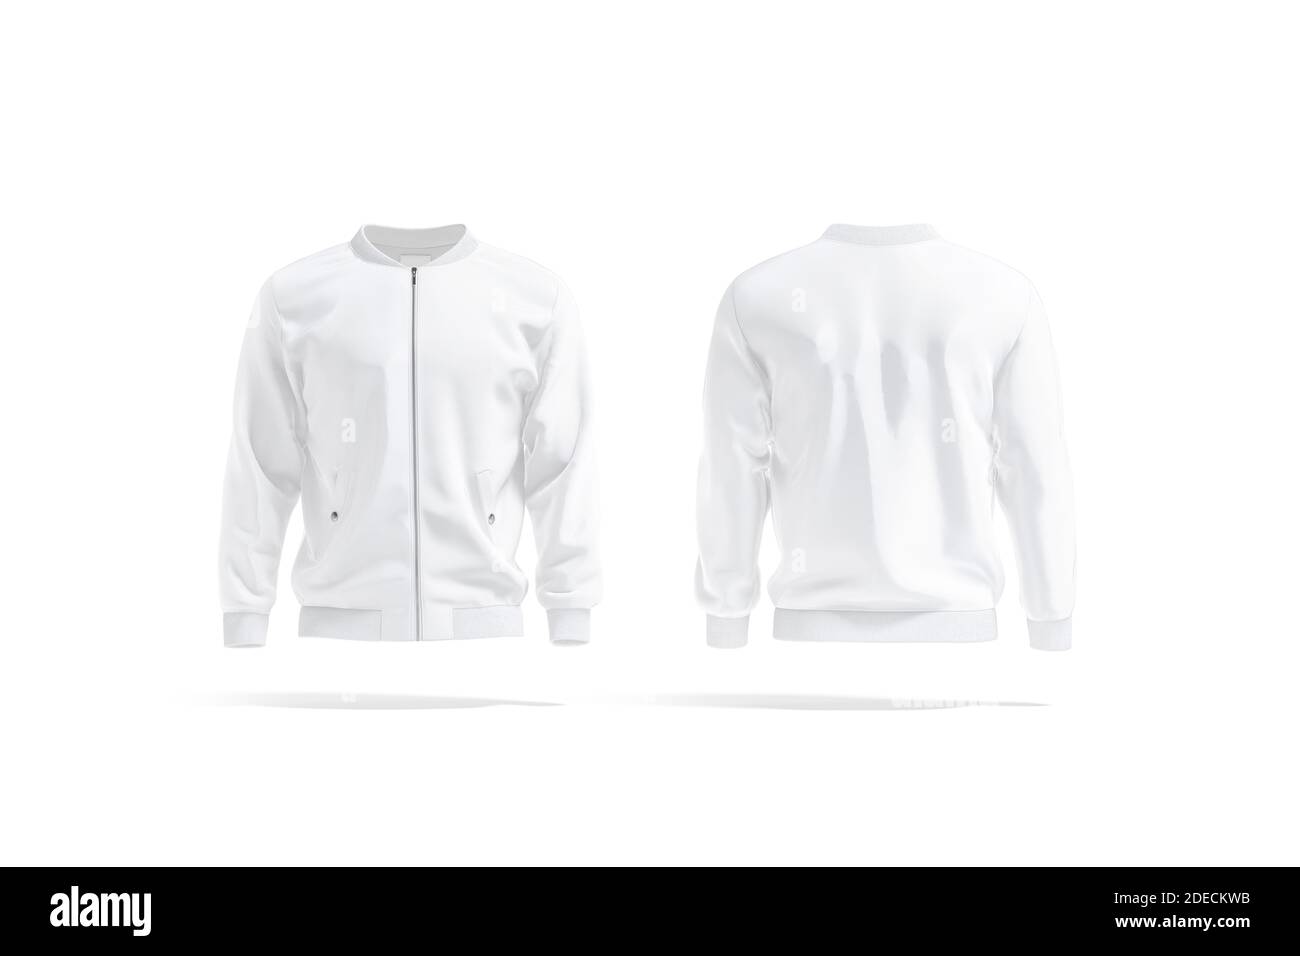 Blank White Bomber Jacket Mockup, Front And Back View Stock ...